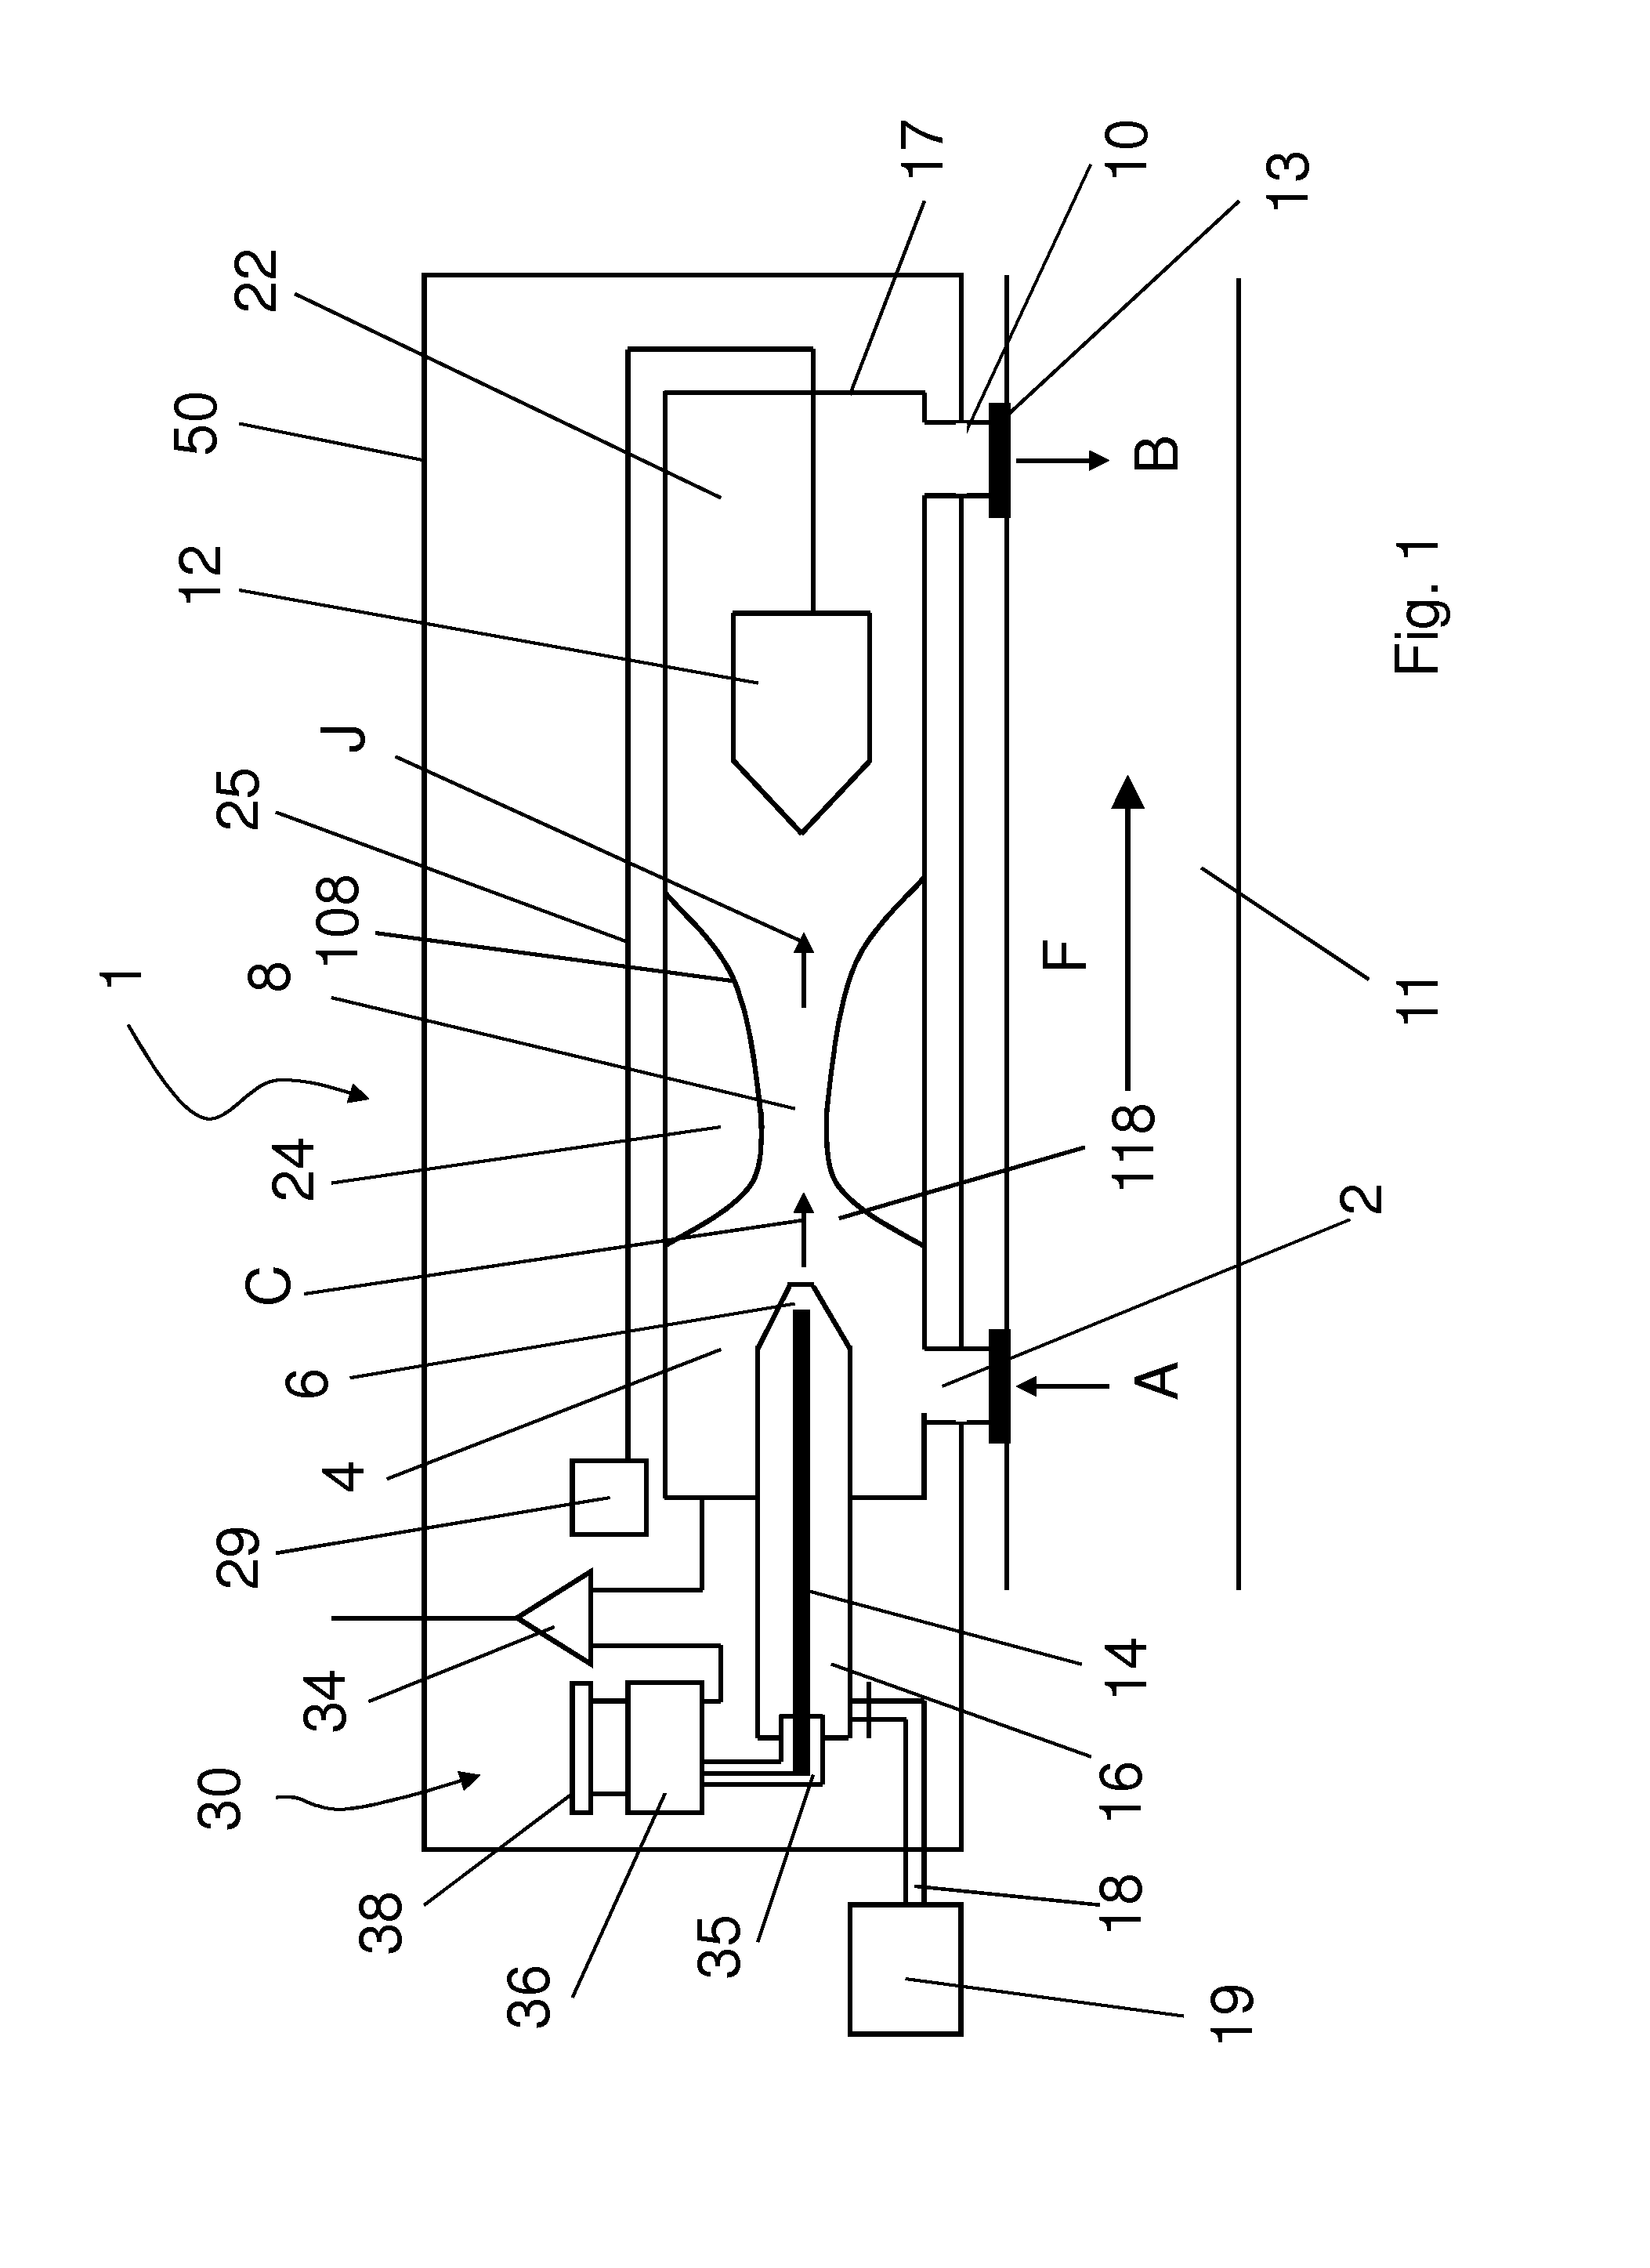 Apparatus for Monitoring Particles in an Aerosol